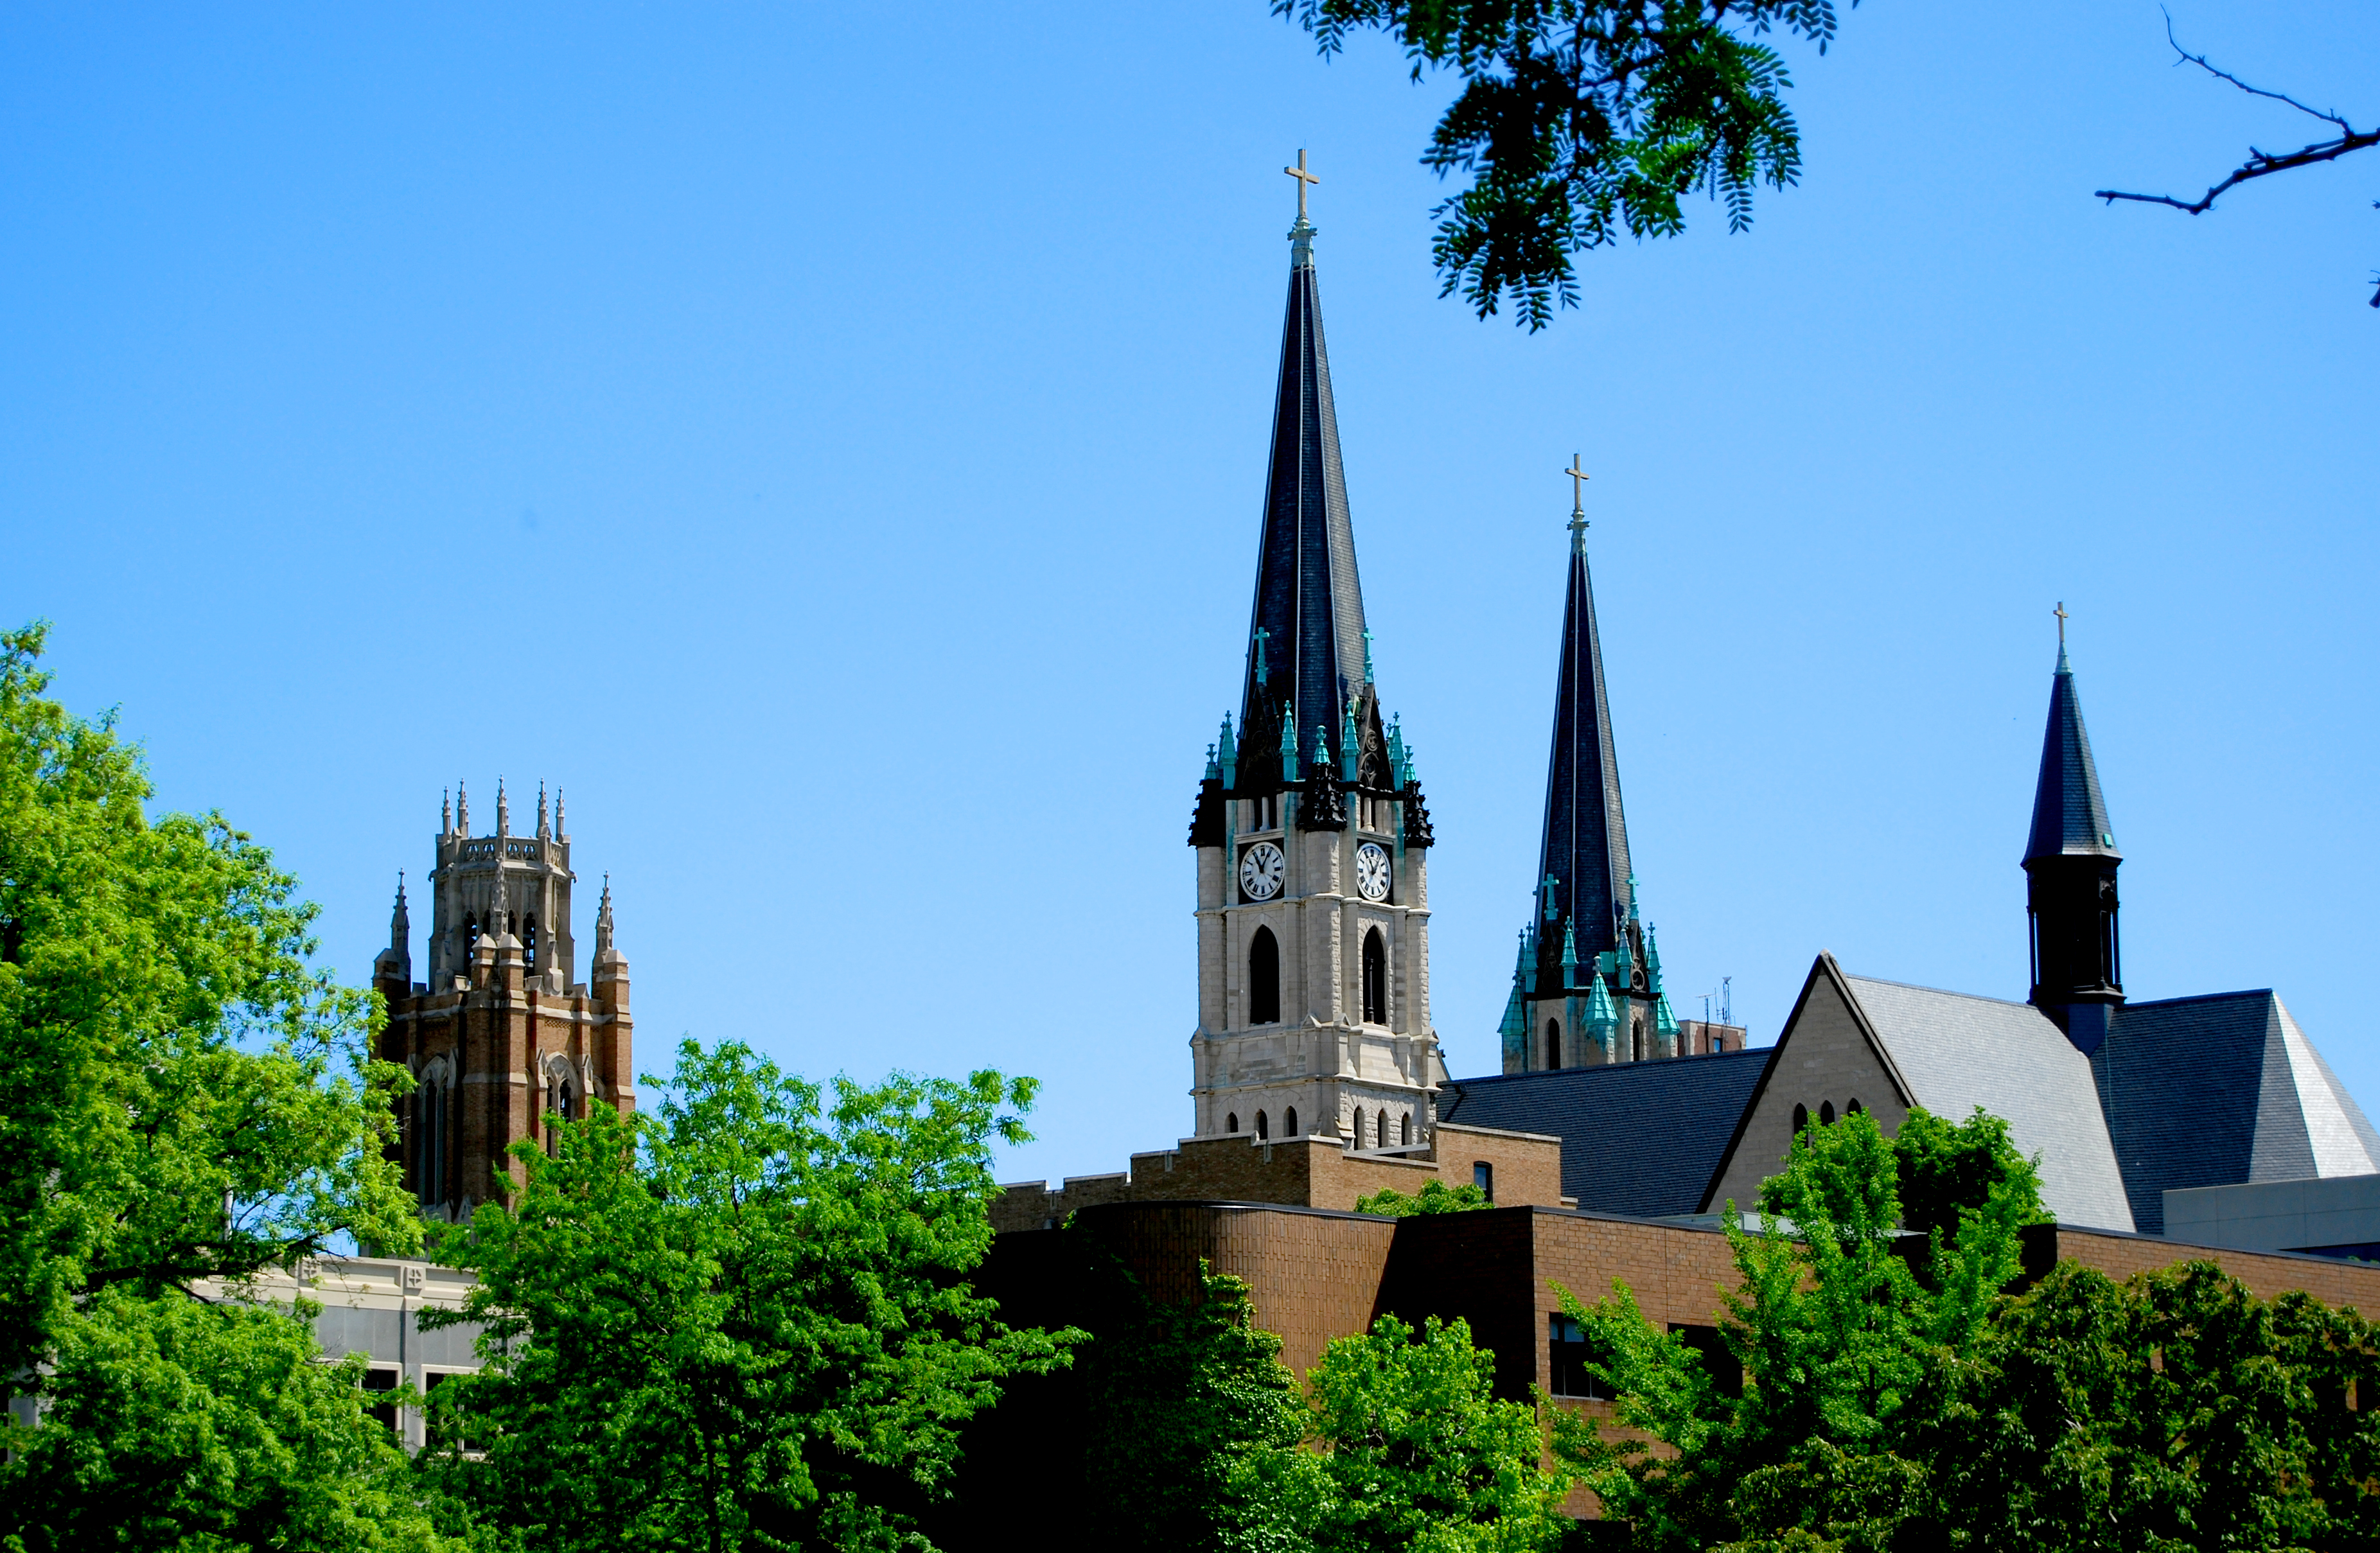 Log in to Microsoft 365 : Marquette University ITS